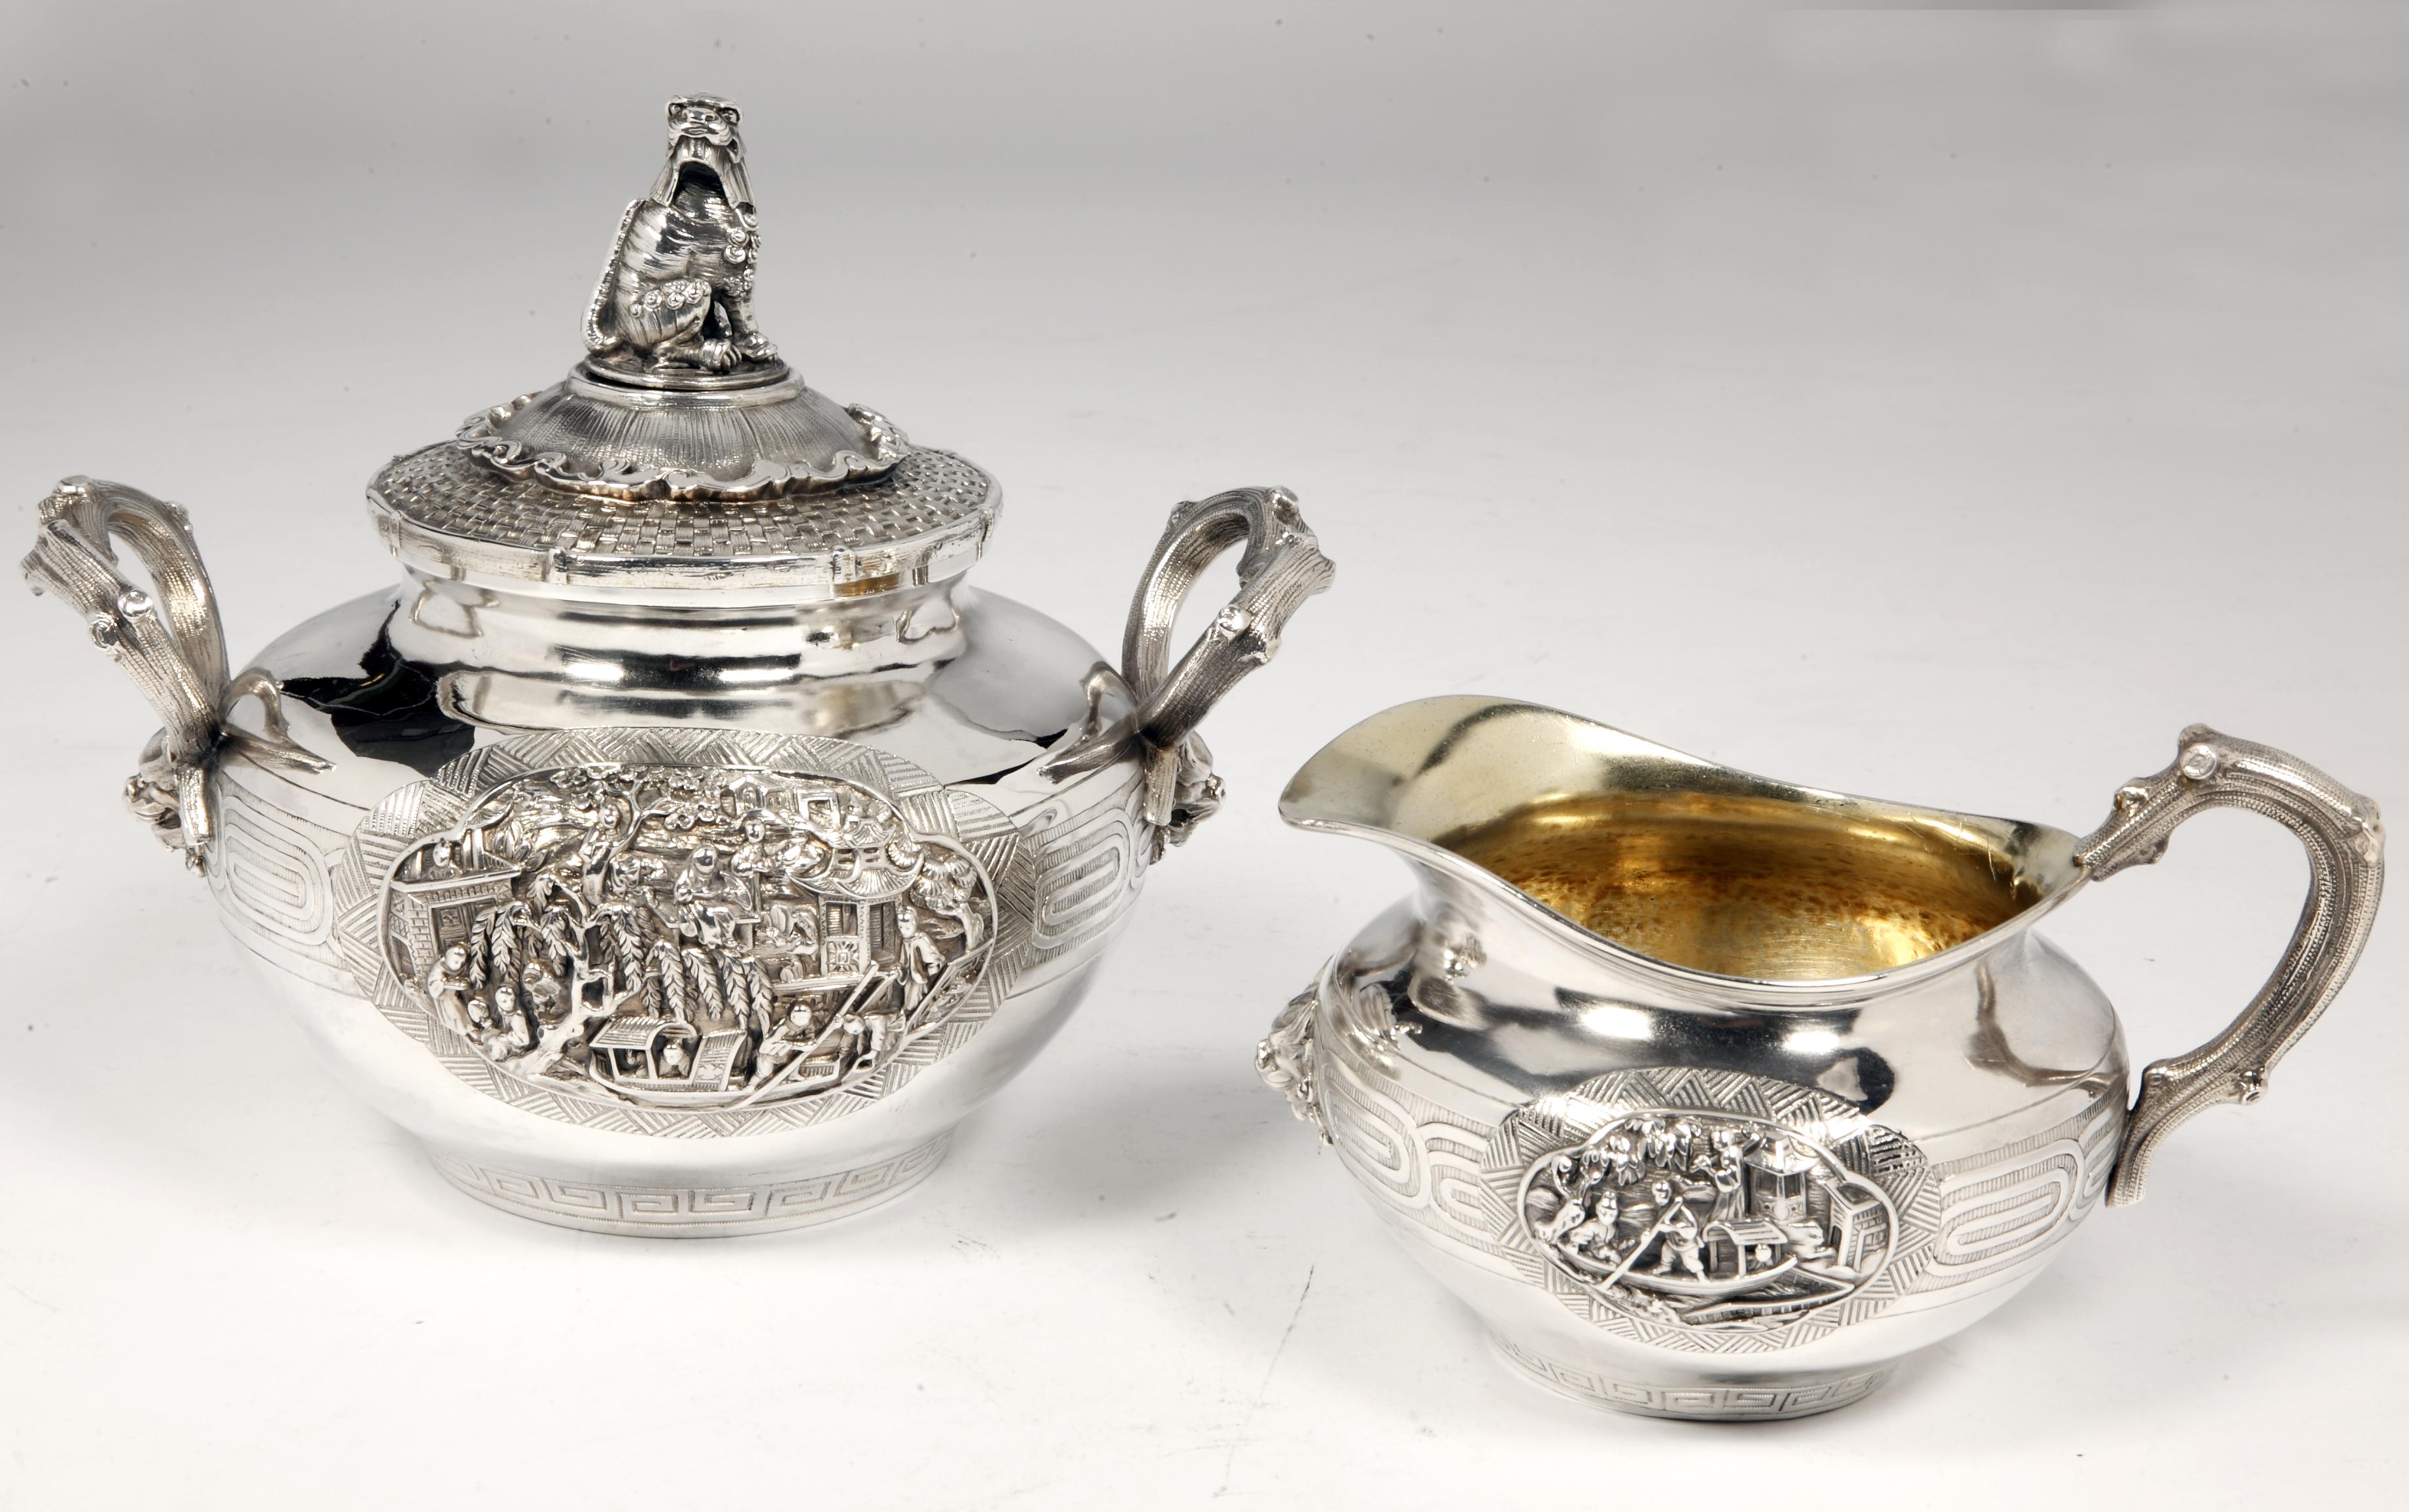 These pieces are made of solid silver. The body is plain, on a flat background, decorated with a Greek frieze and applied on both sides, village scenes in Chinese style. The lid of the sugar bowl is beautifully carved with a woven wicker imitation